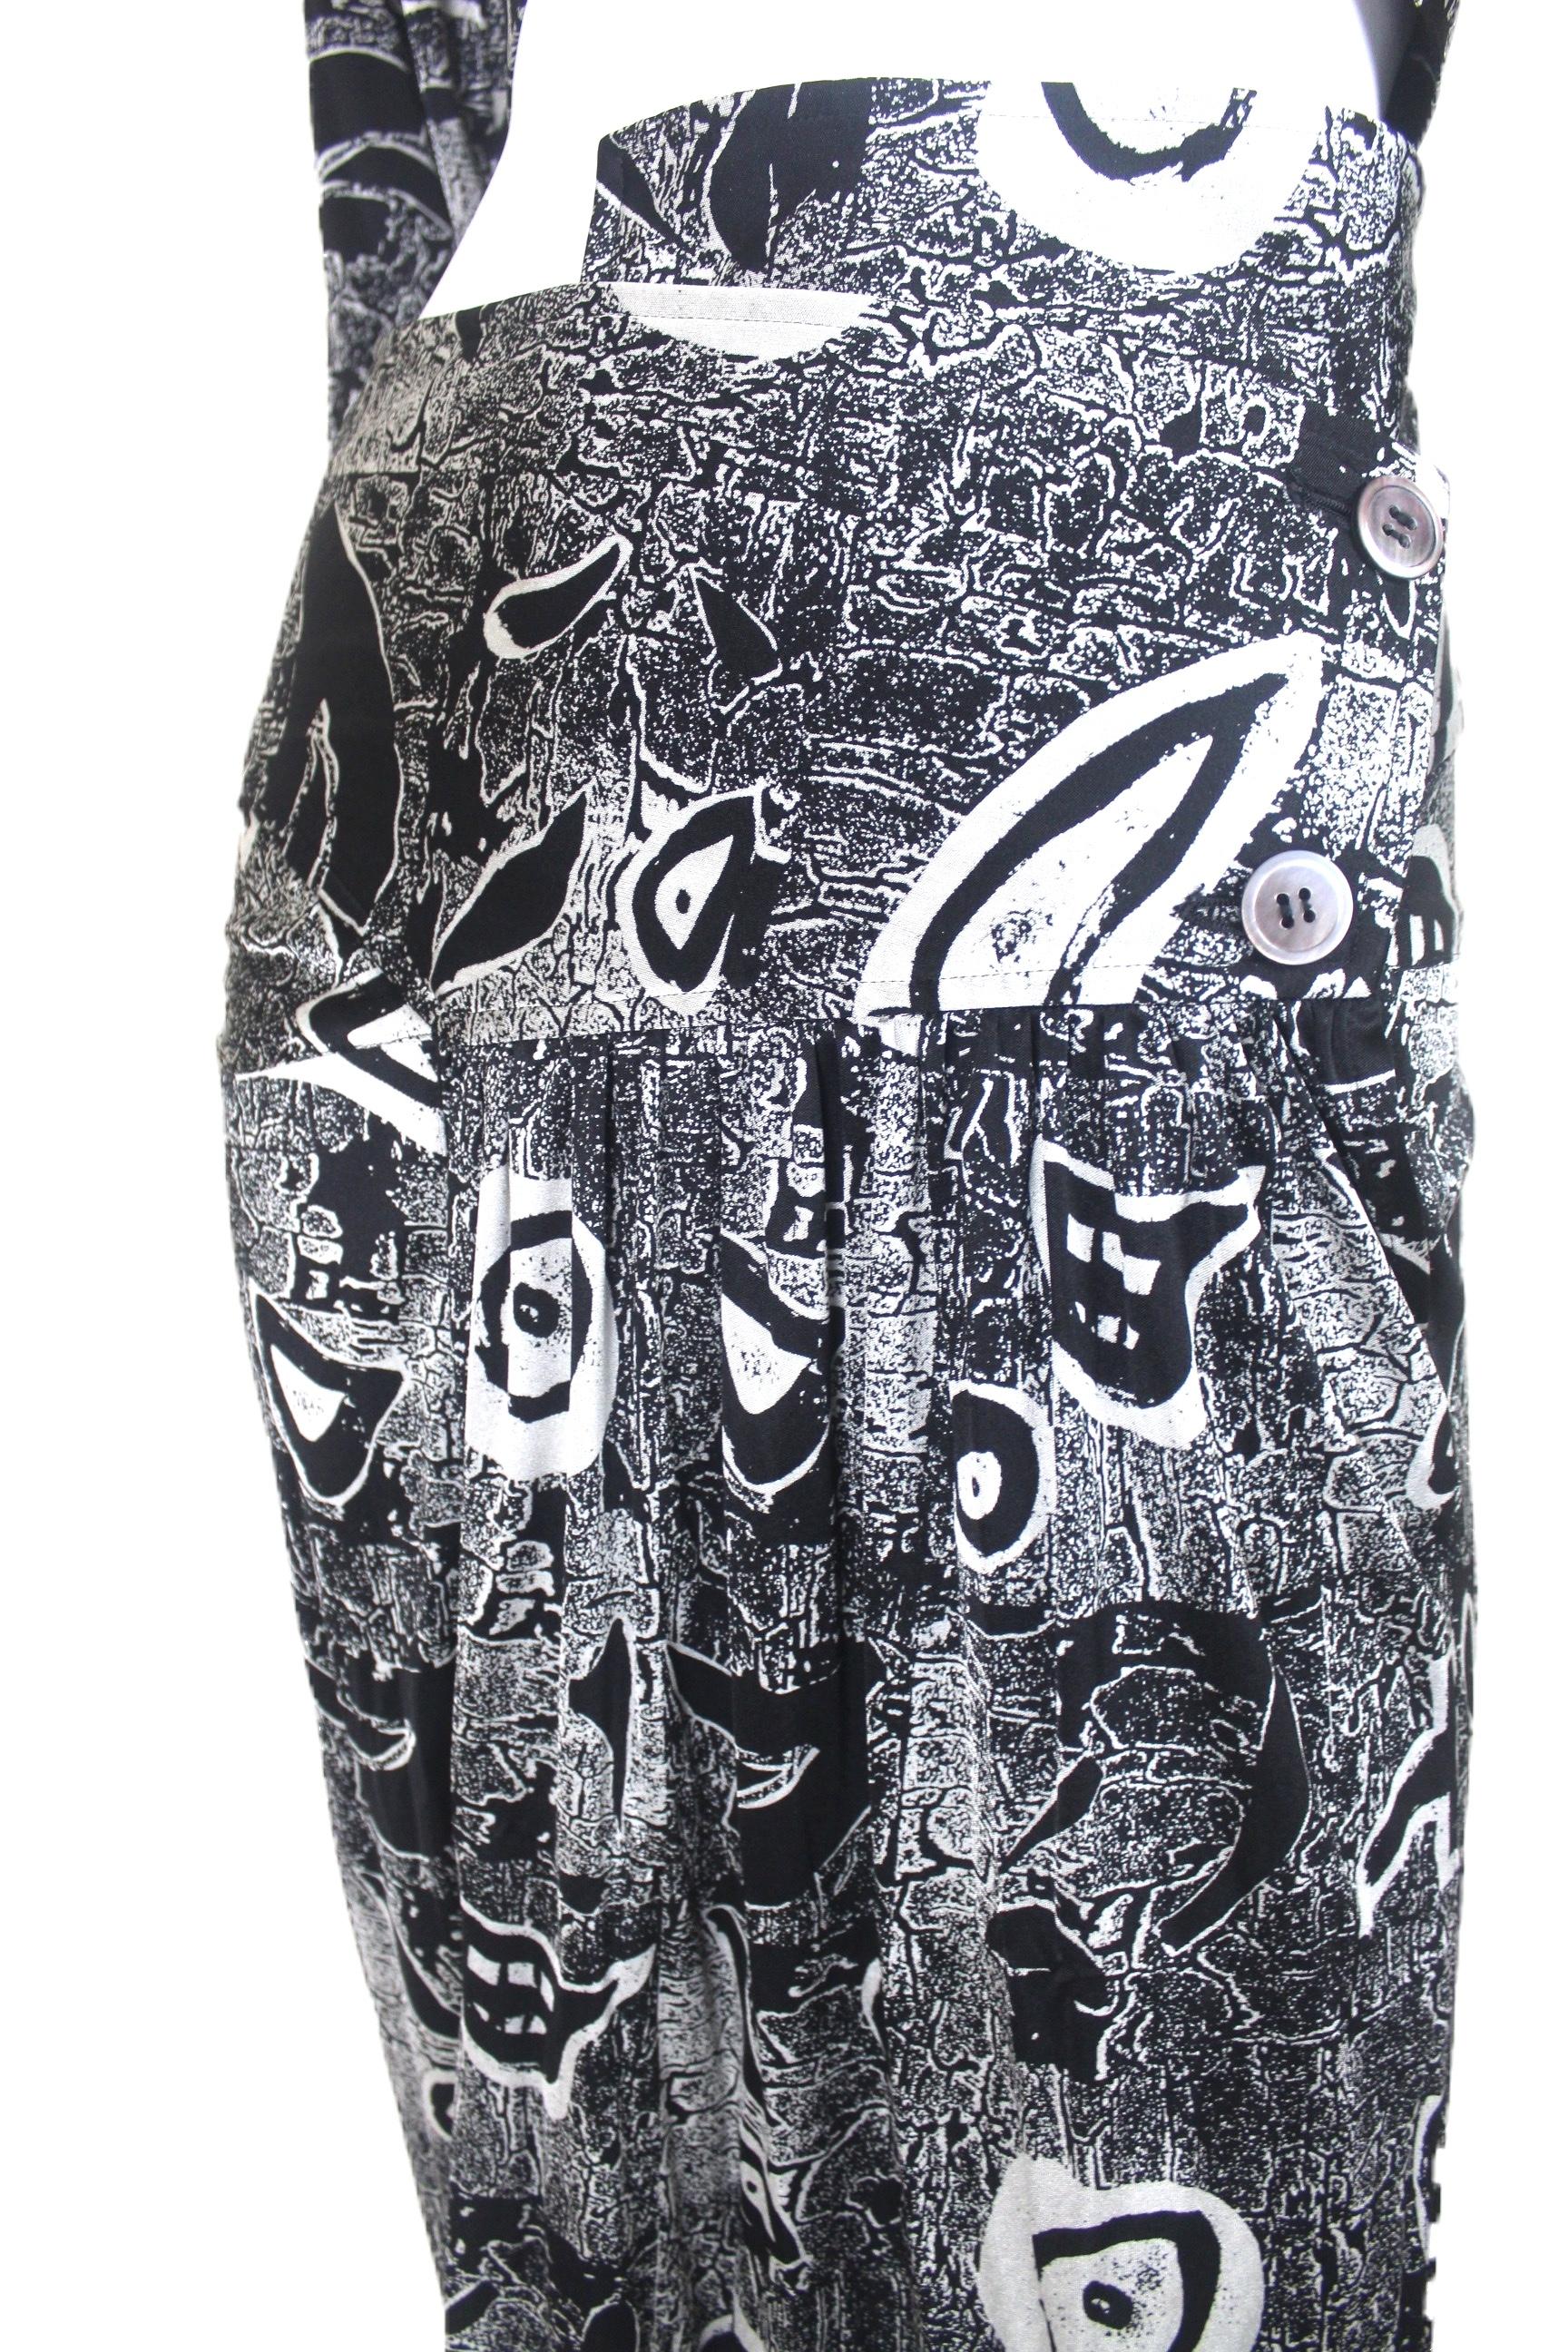 Comme des Garcons Early 90's Abstract Print Skirt and Top In Excellent Condition For Sale In Bath, GB